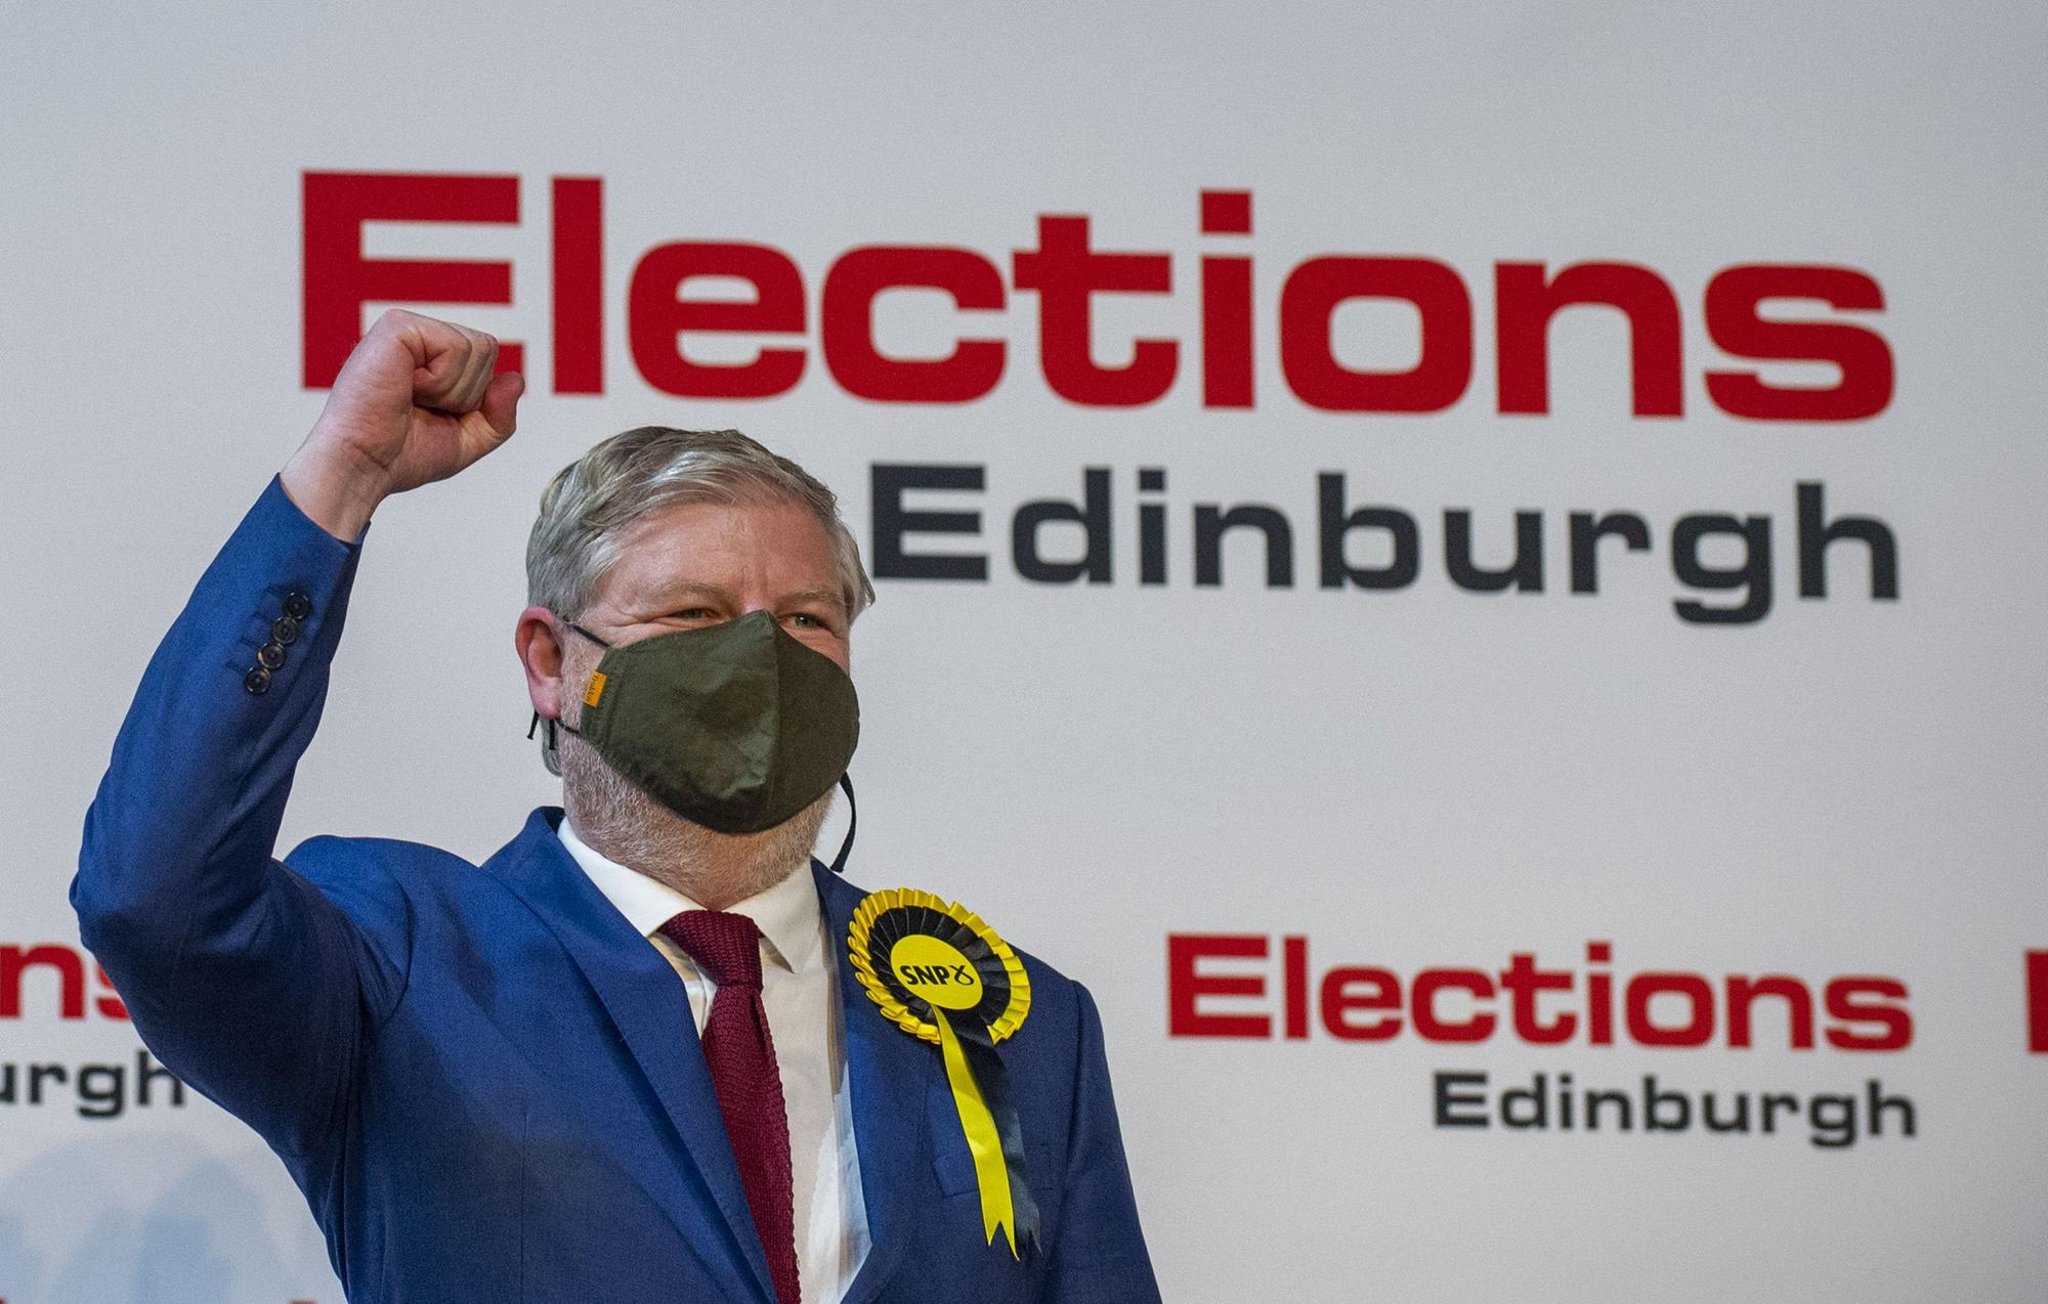 As Edinburgh Central MSP, I am at your service whether you voted for me or not – Angus Robertson